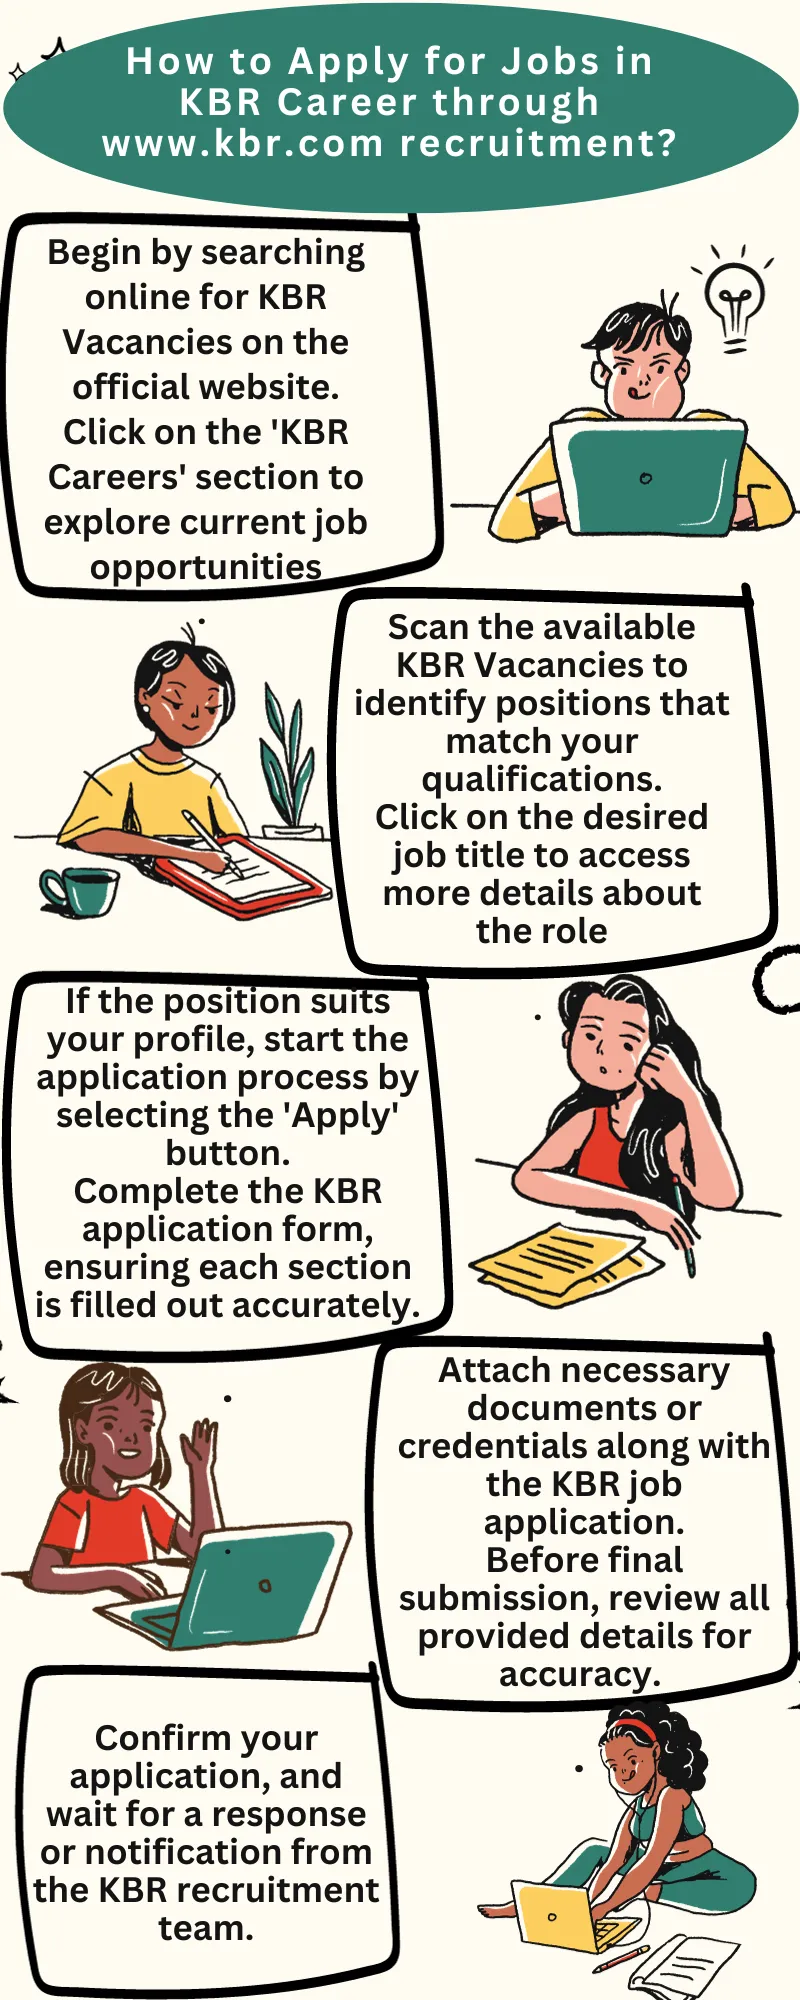 How to Apply for Jobs in KBR Career through www.kbr.com recruitment?